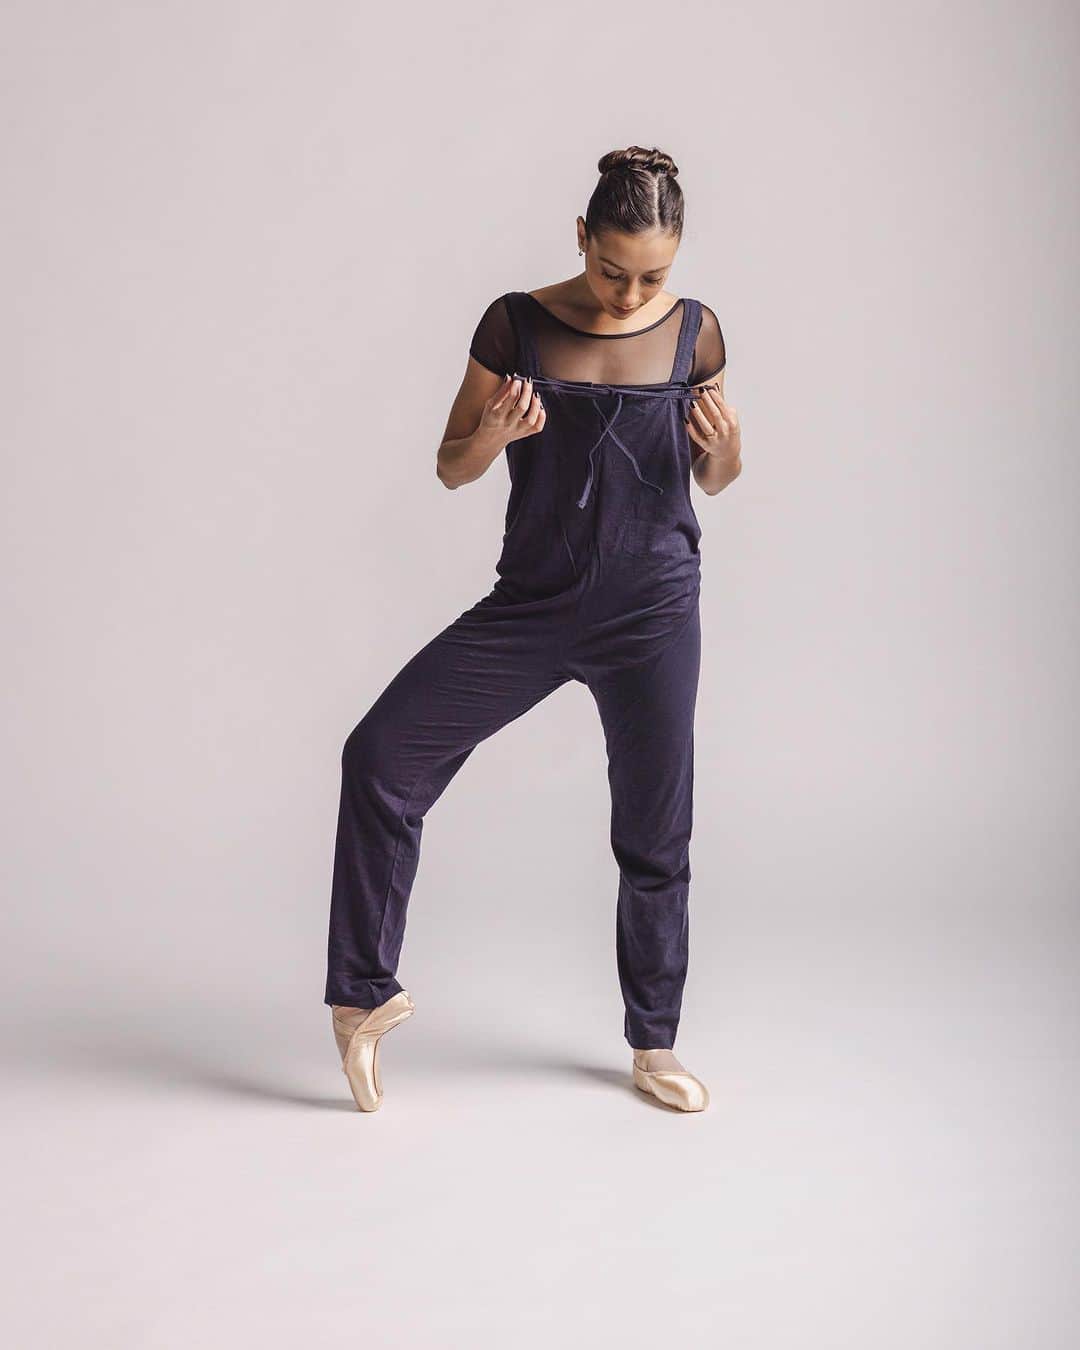 Ballet Is A WorldWide Languageのインスタグラム：「Dance your way into the new year with our best sellers, now on sale!! Enjoy up to 40% off site wide - it’s a once in a year sale 😱 www.worldwideballet.net ✨ Seen here: @xosarahryan wearing Navy romper + Zoe leotard   #worldwideballet」